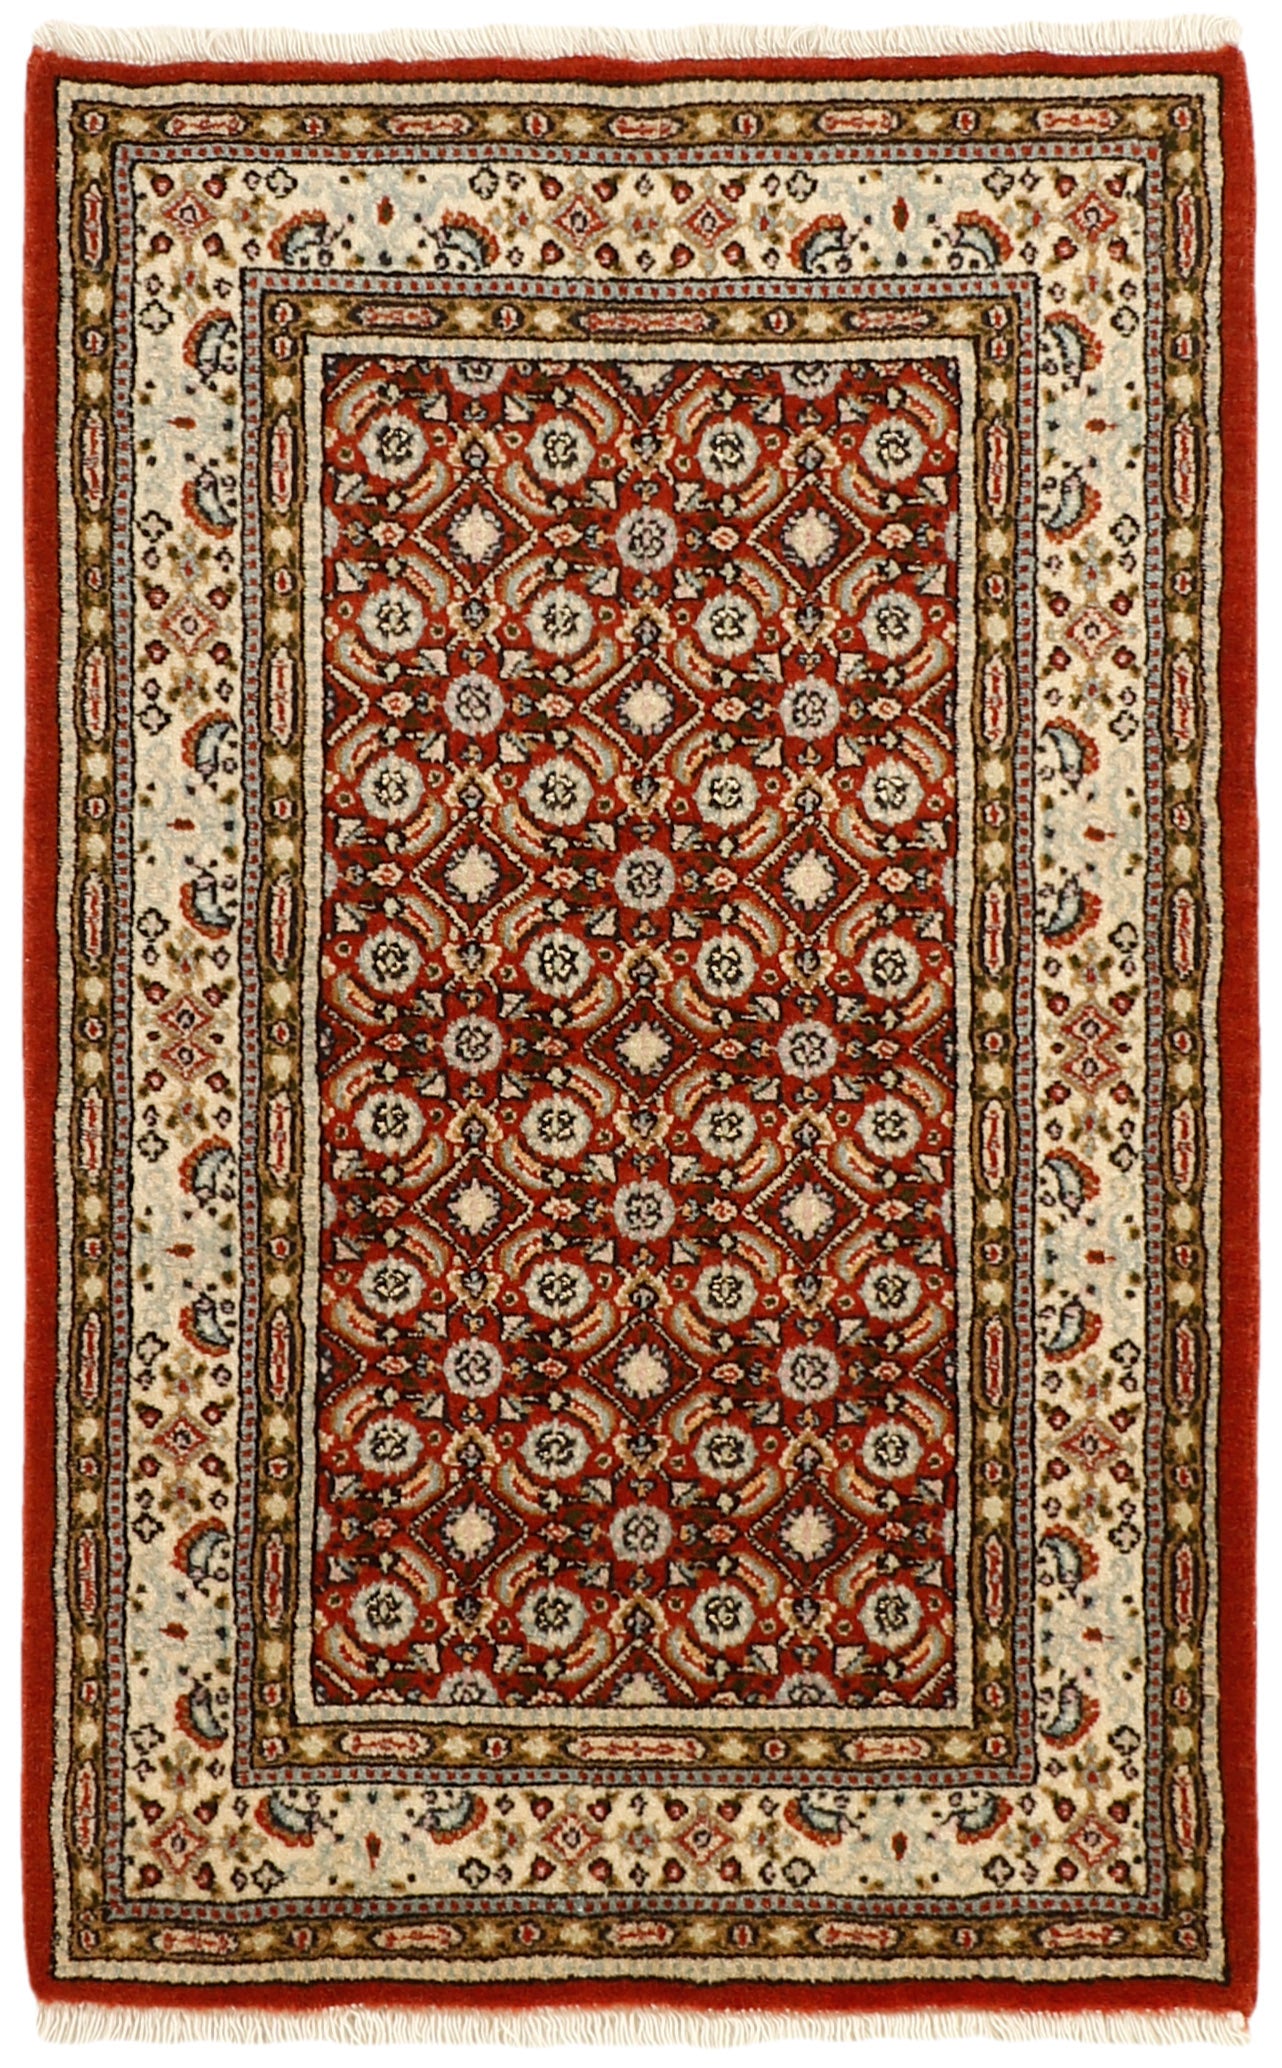 authentic persian rug with traditional floral pattern in beige